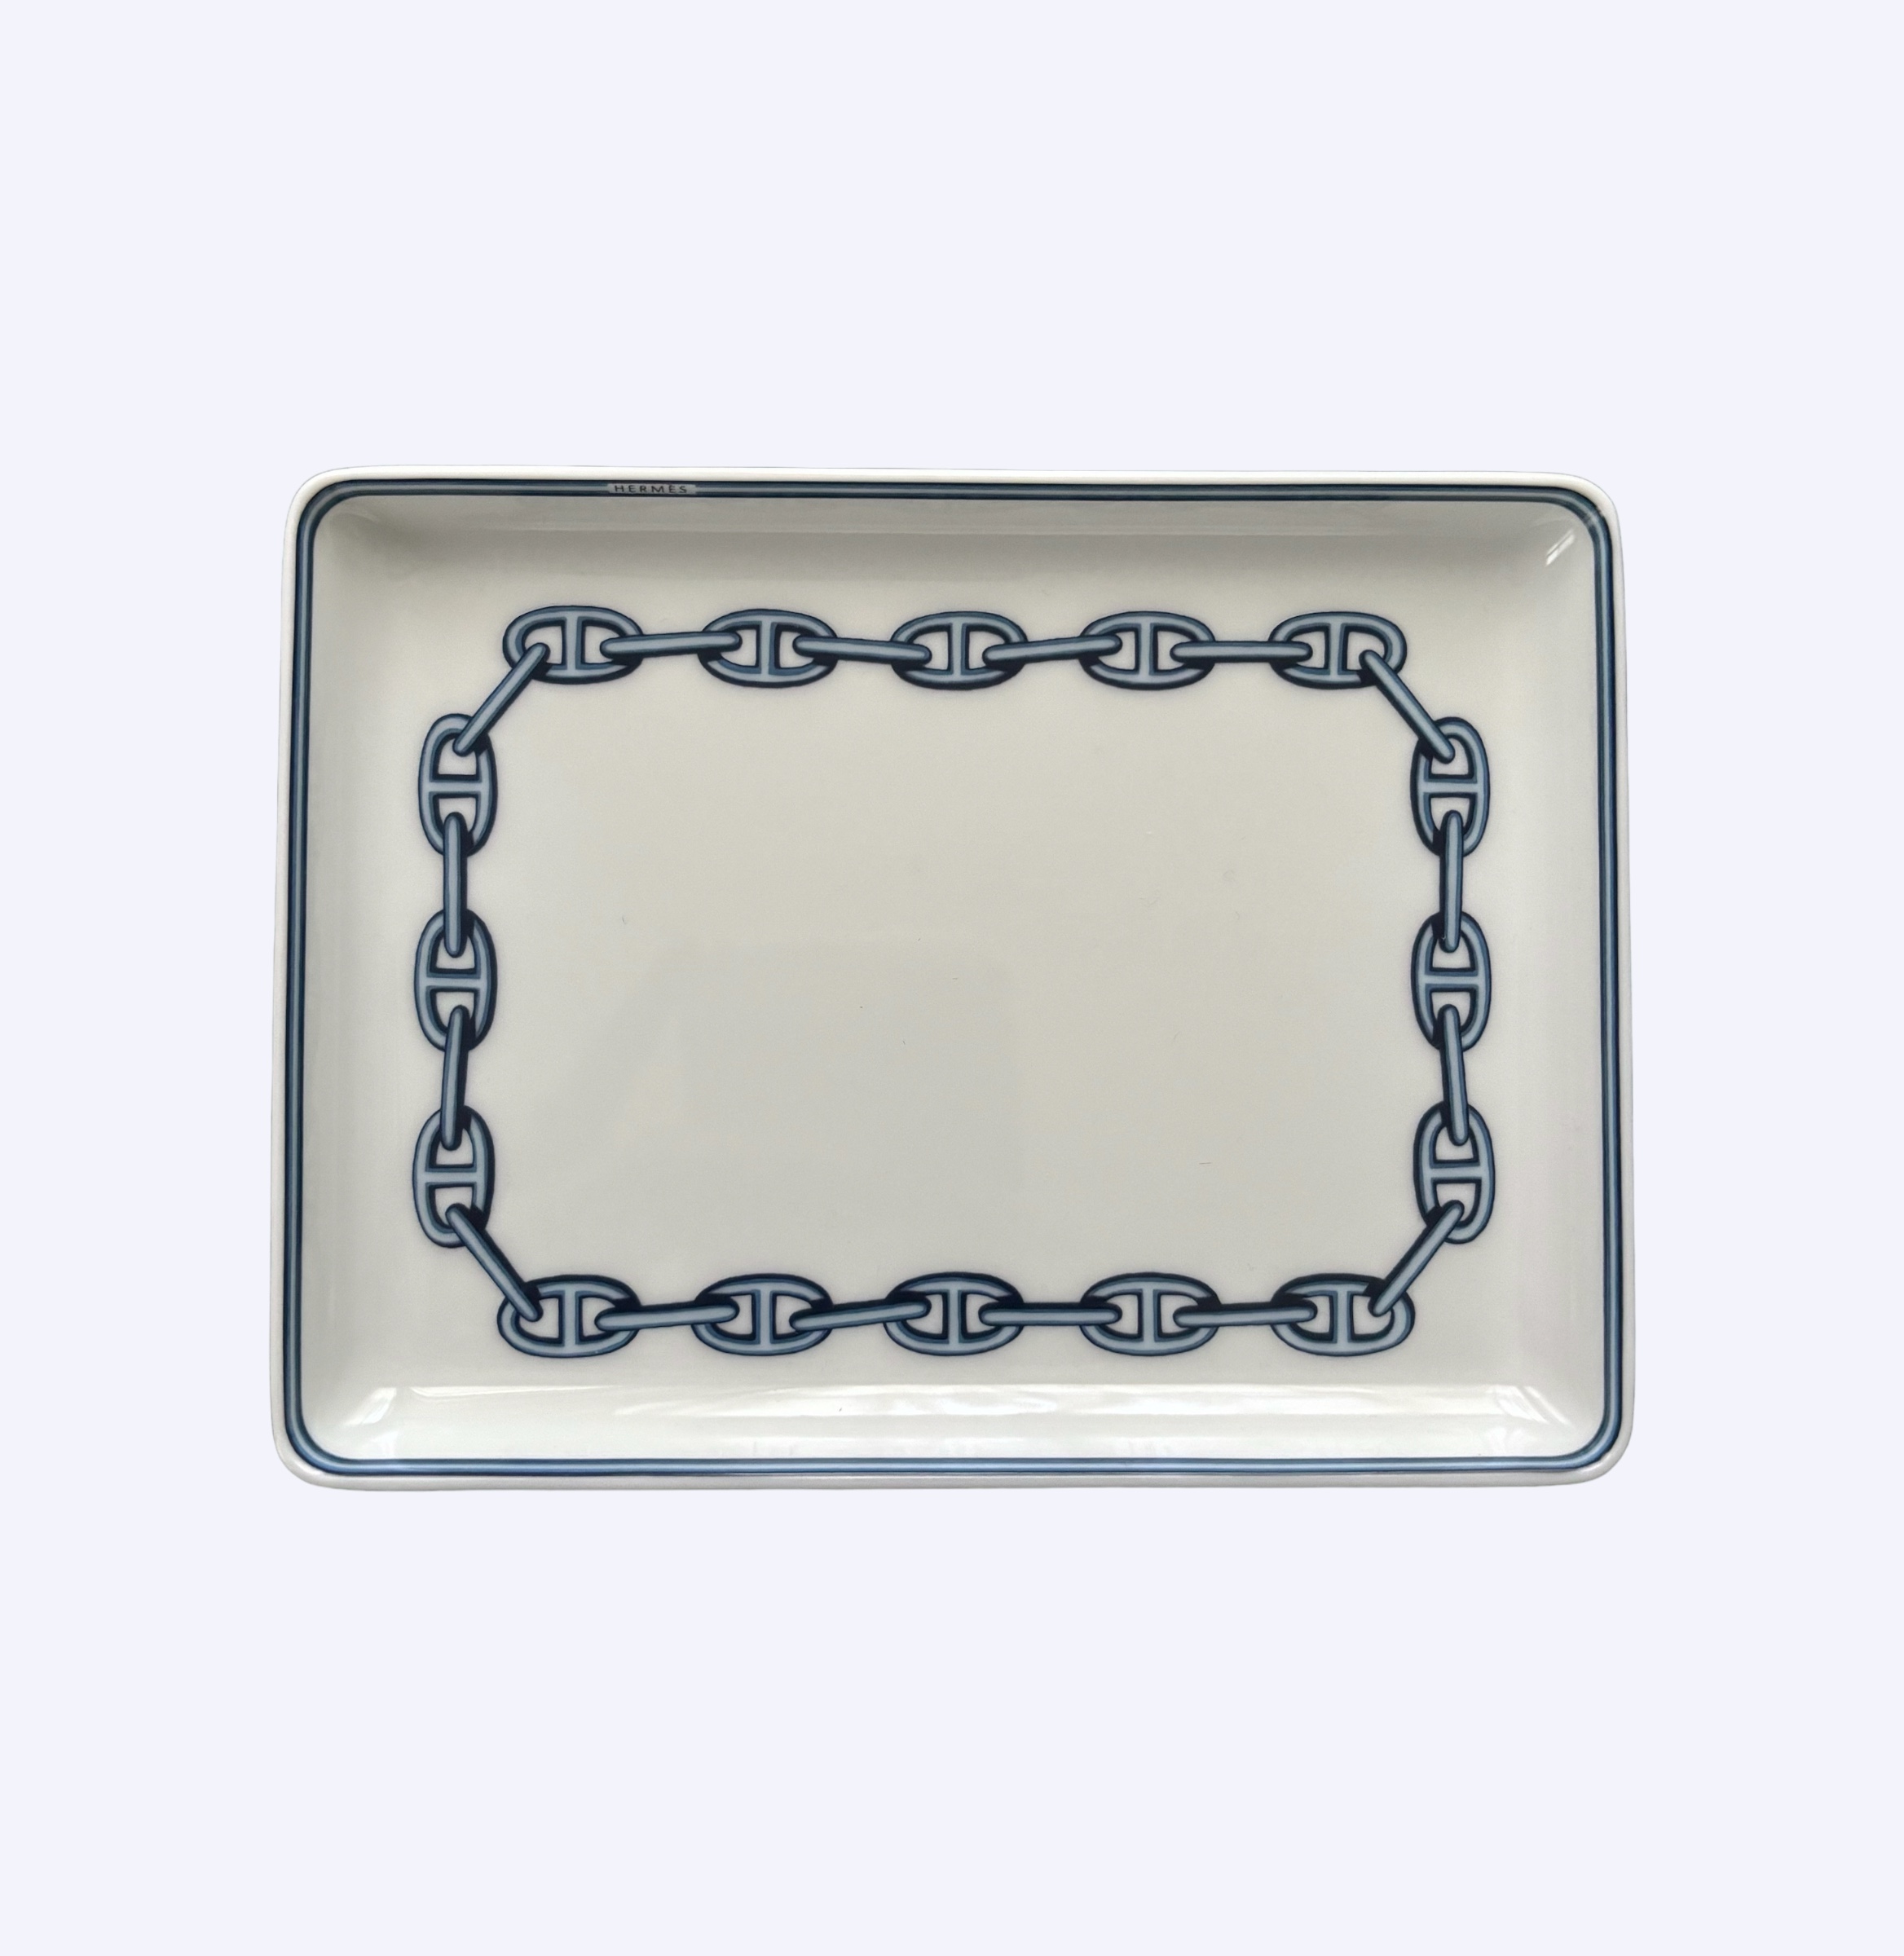 Top down view of Hermes white chain ashtray / jewelry plate